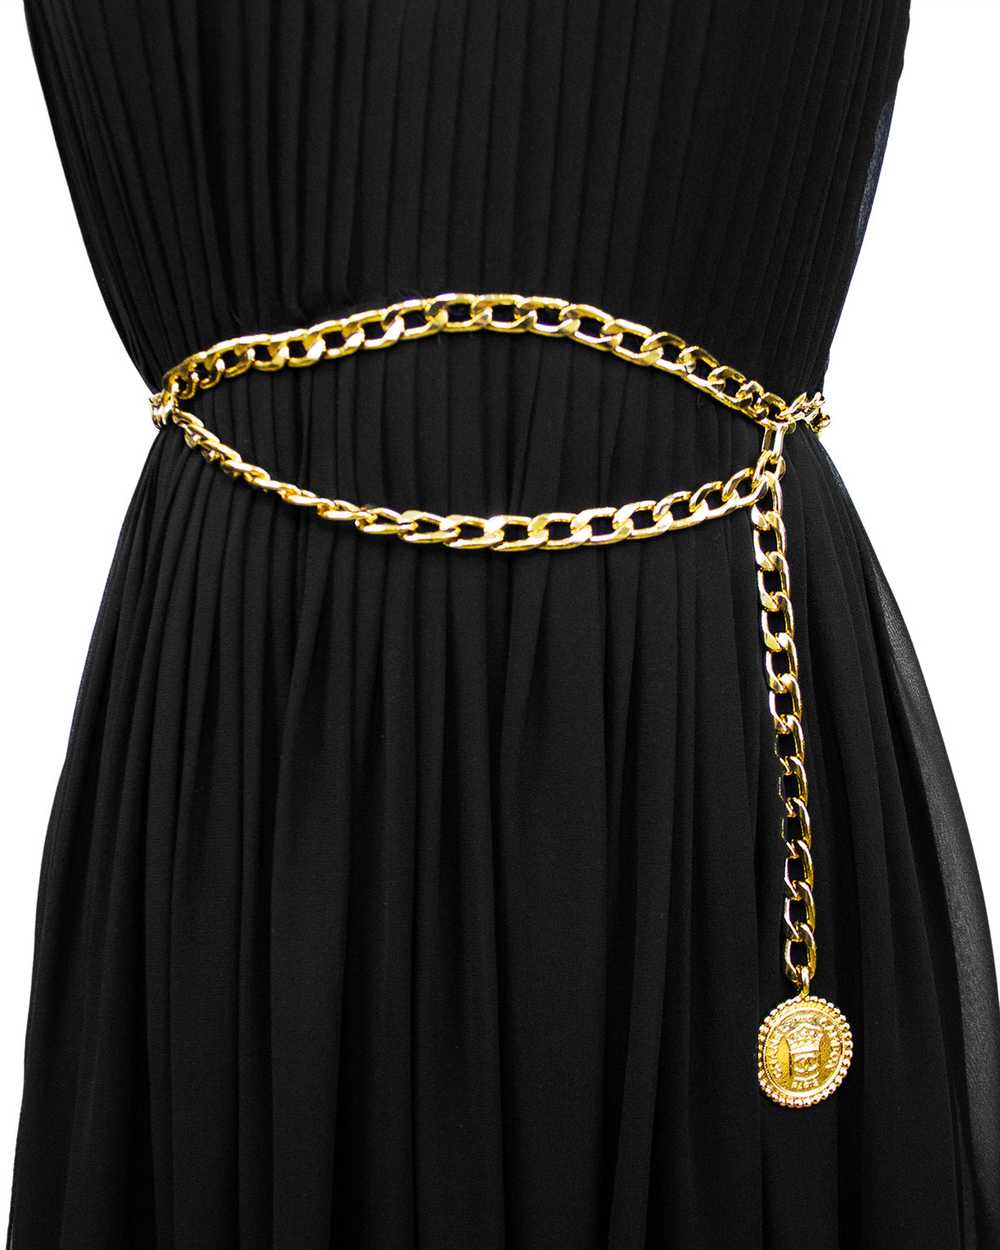 Chanel Black Chiffon Gown with Gold Chain Belt - image 5